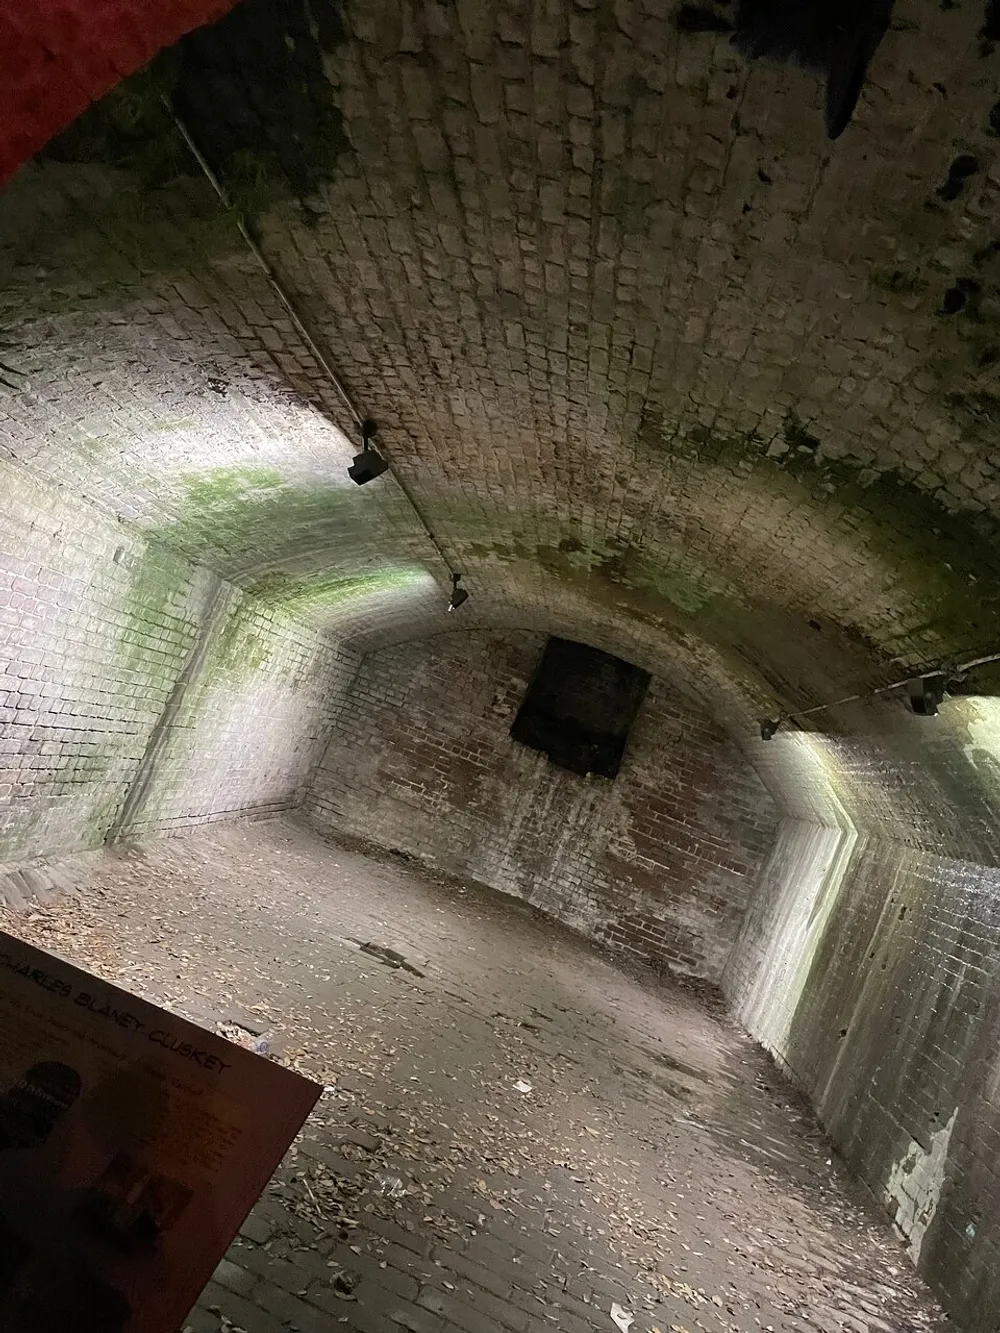 The image shows a dimly-lit arched brick underpass or tunnel with some vegetation on the ceiling light fixtures hanging down a small window or opening on the far wall and some debris on the ground